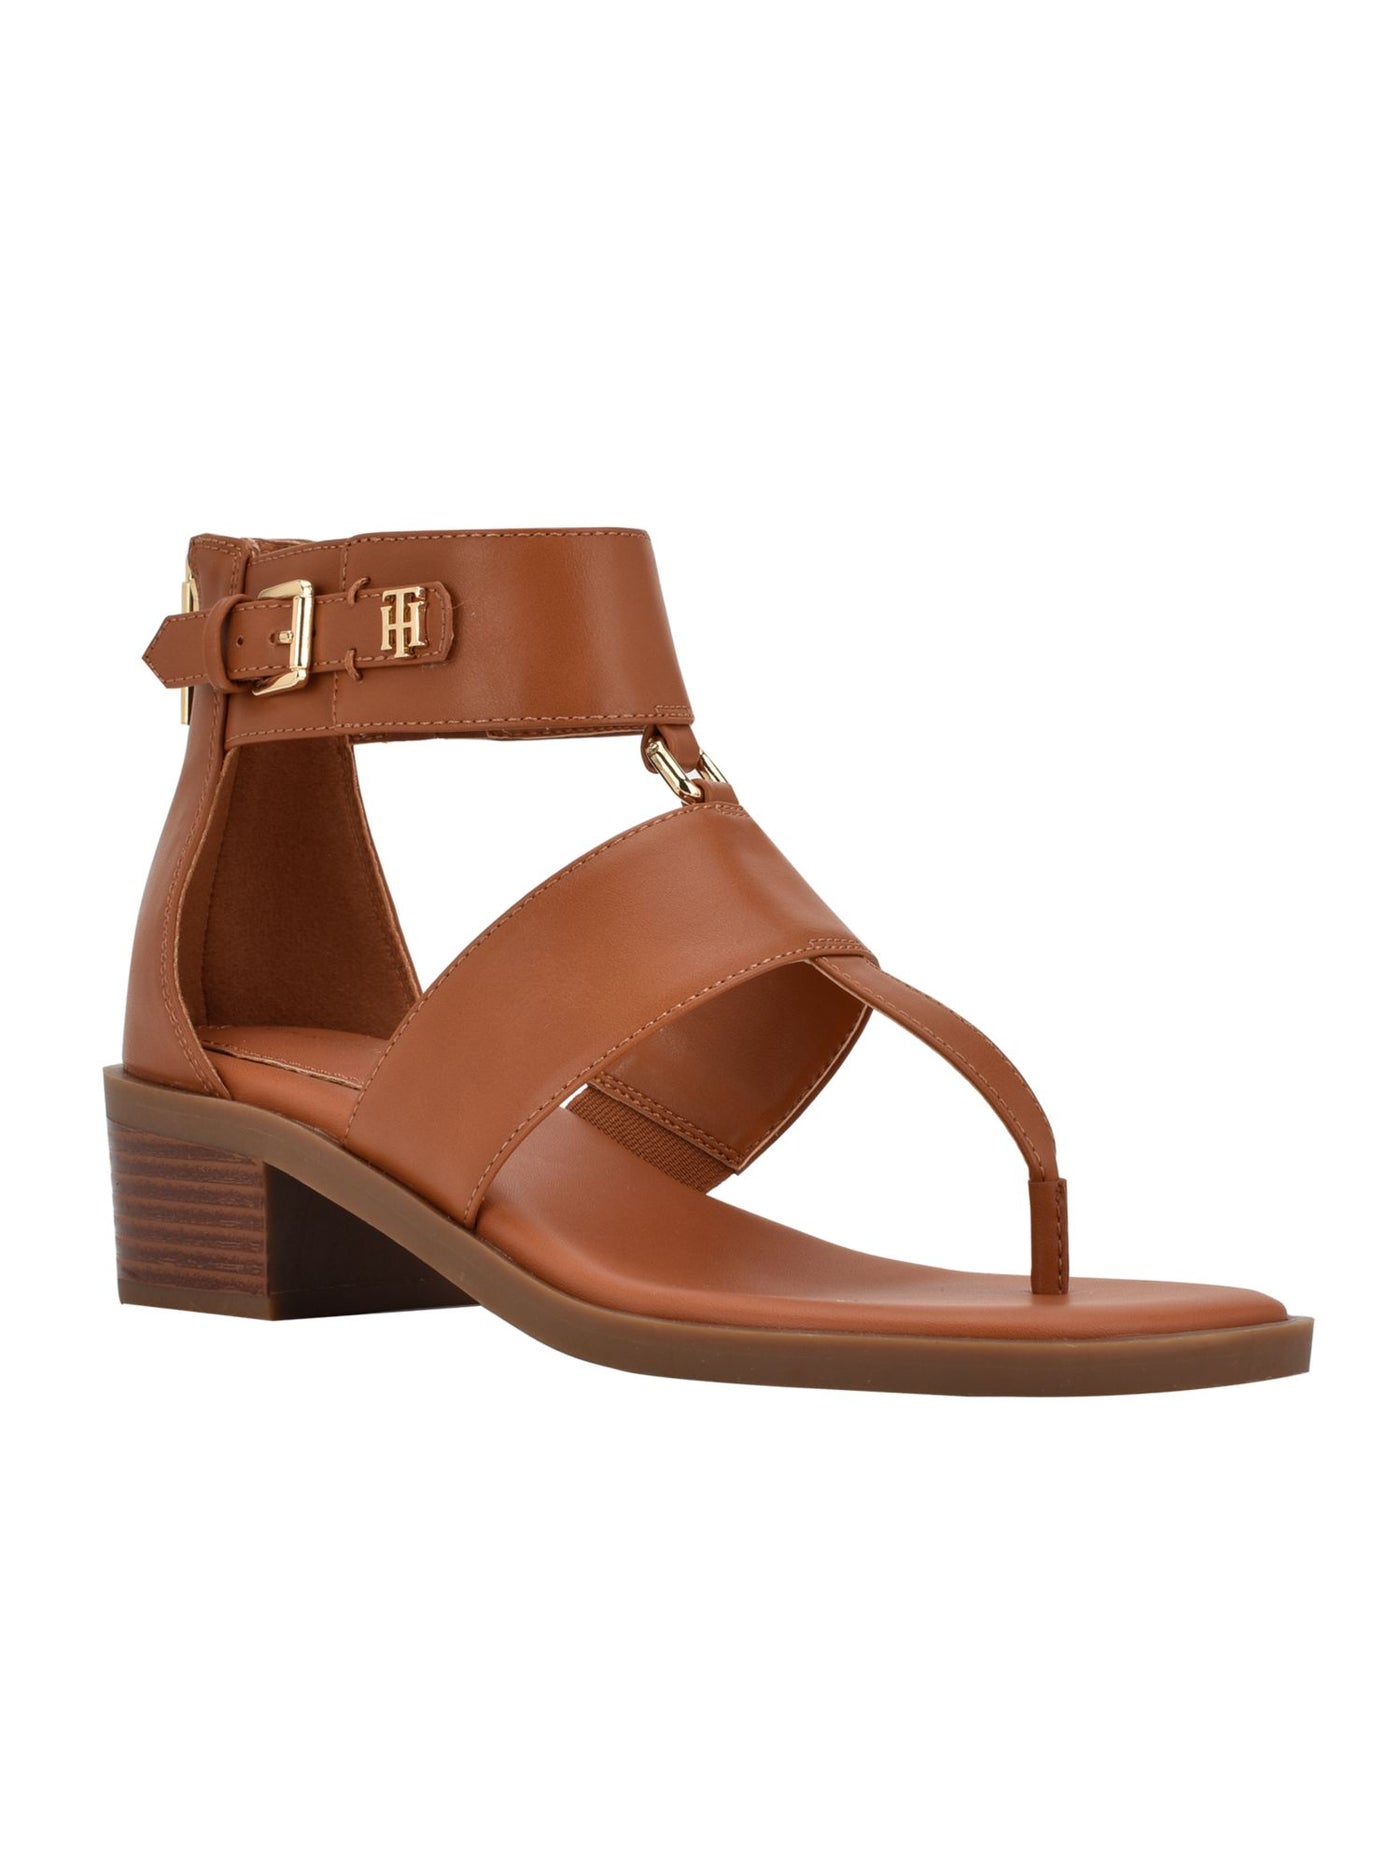 TOMMY HILFIGER Womens Brown T-Strap Padded Ankle Strap Buckle Accent Obell Open Toe Block Heel Zip-Up Heeled Sandal 6 M